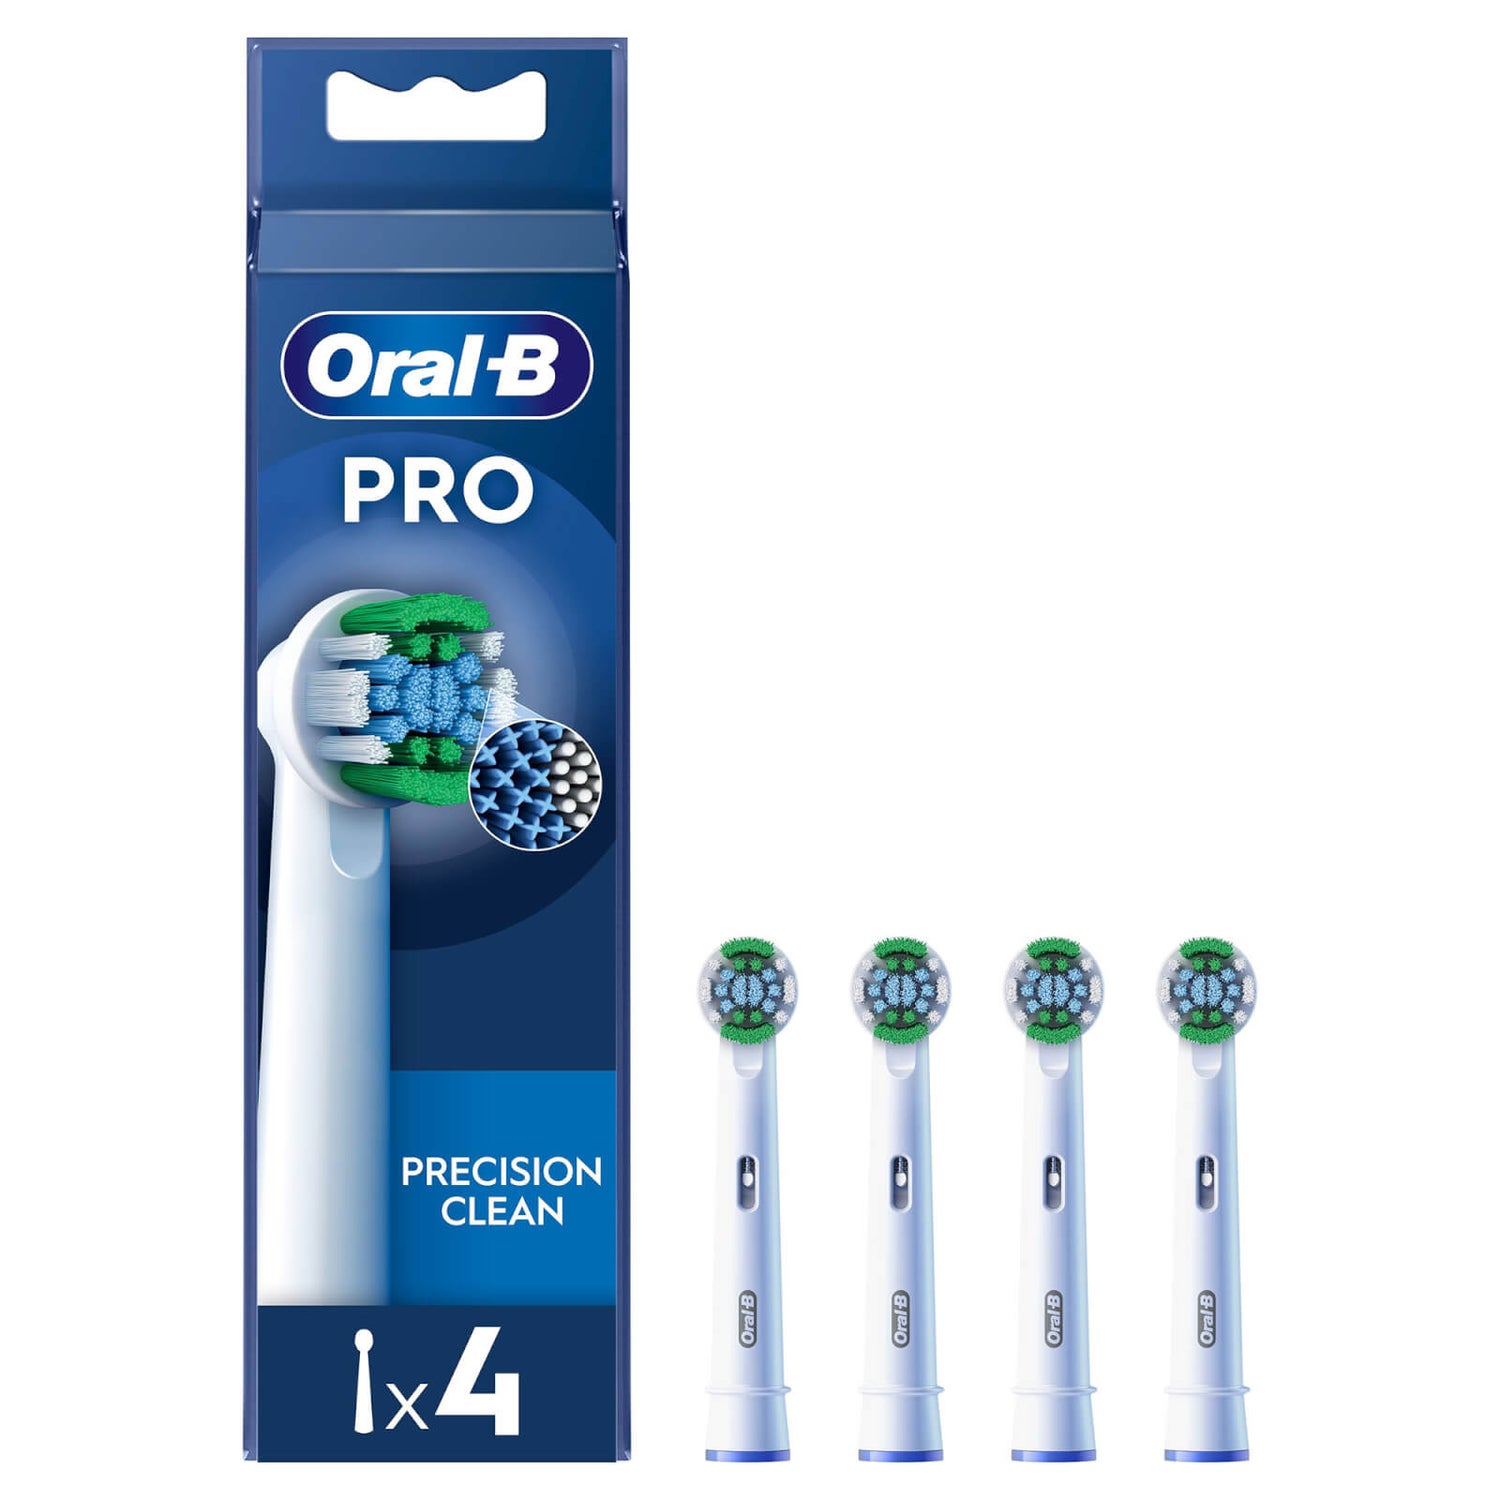 Oral B Precision Clean White Toothbrush Heads - Pack of 4 Counts